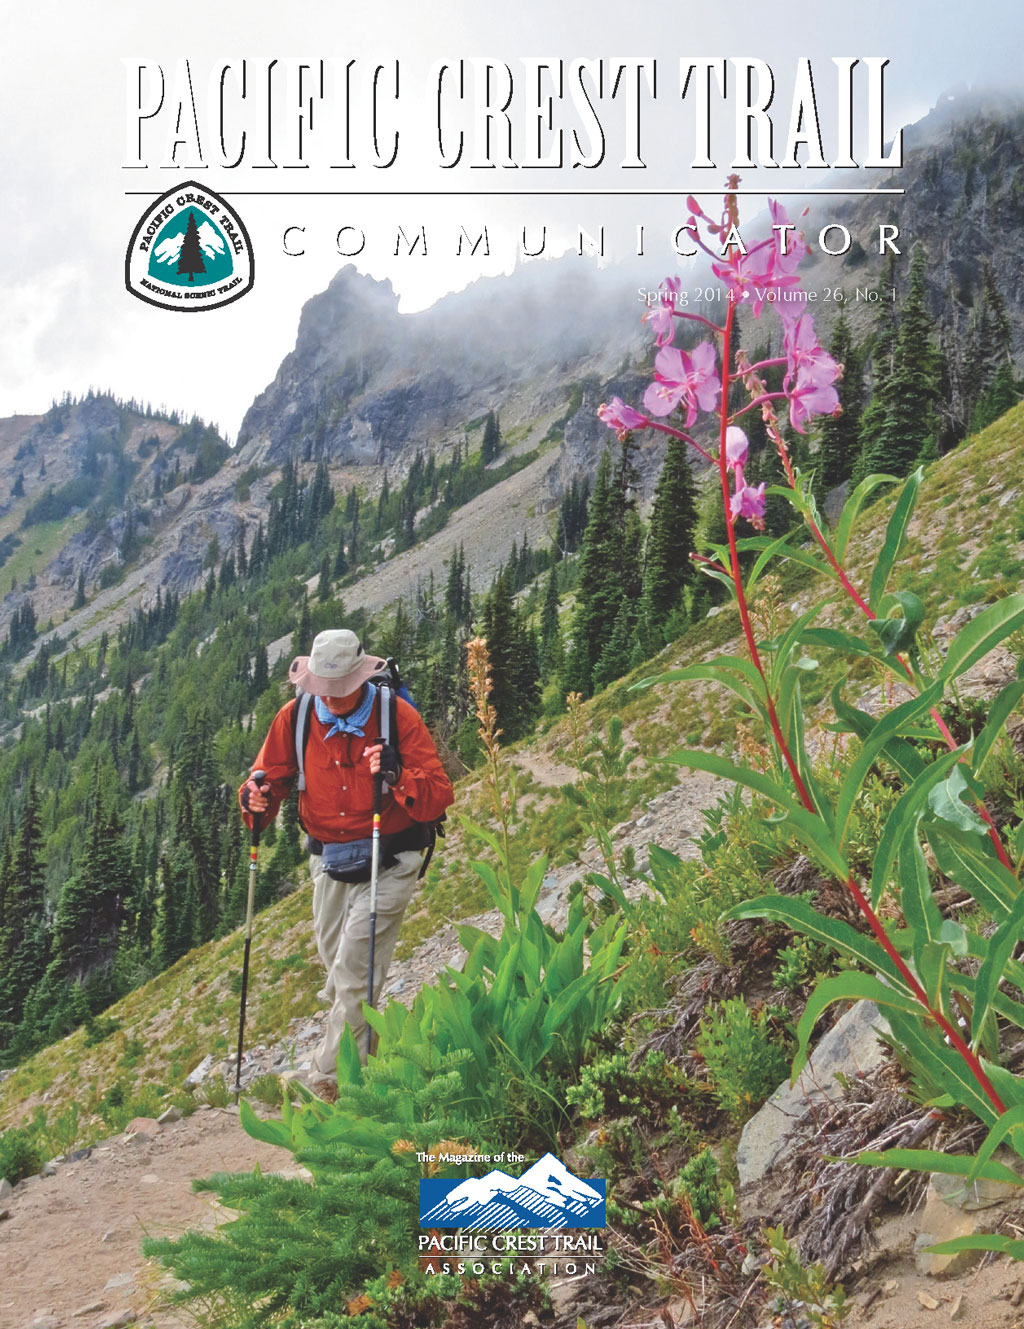 The spring issue of the PCT Communicator is out!